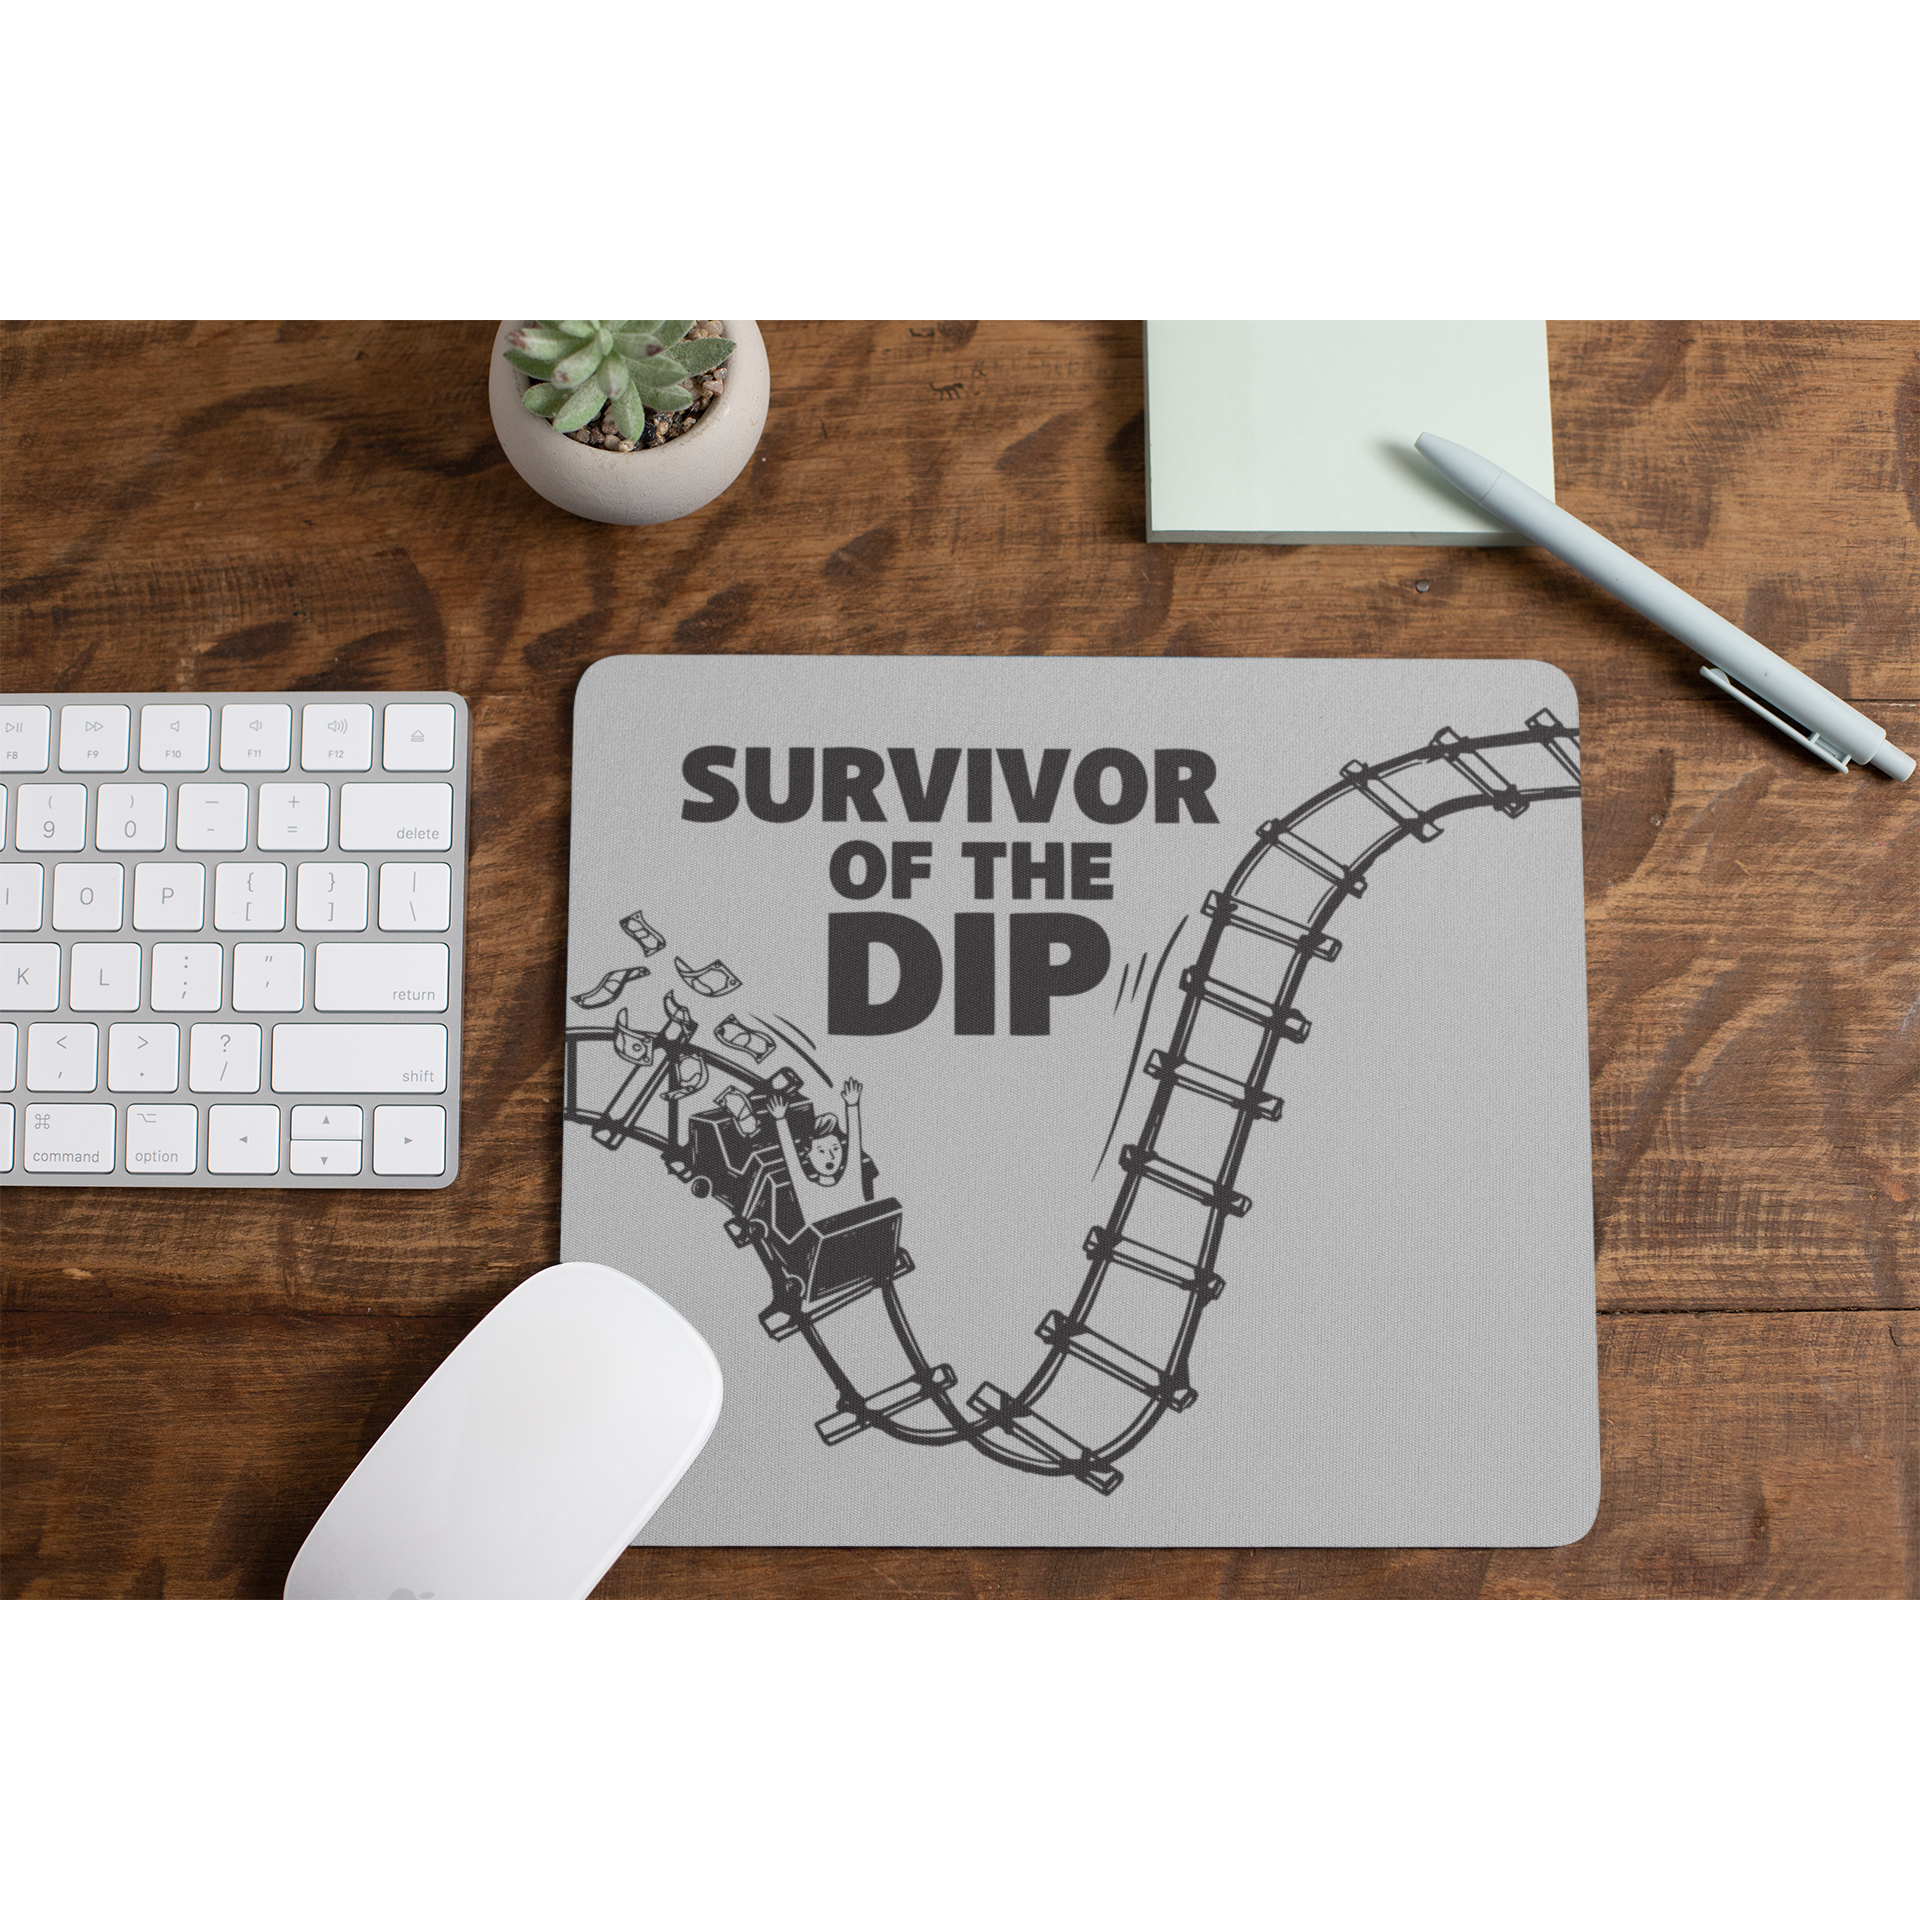 survivor of the dip white mouse pad, for traders, investing